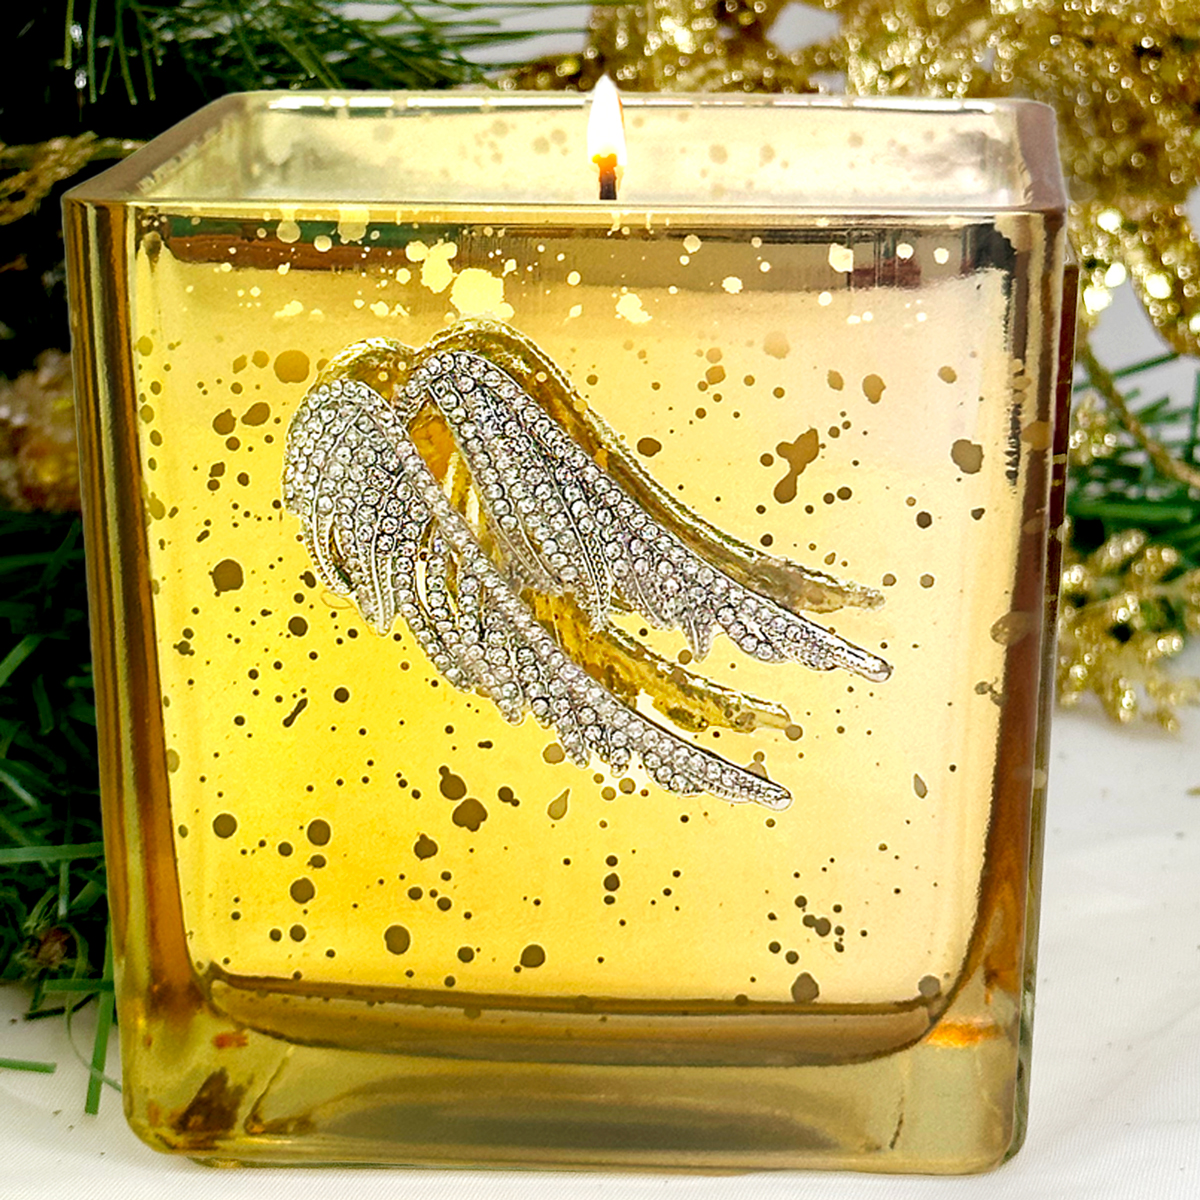 MERCURY GLASS CANDLE - SILVER RHINESTONE WINGS  "GIFTS OF THE MAGI"